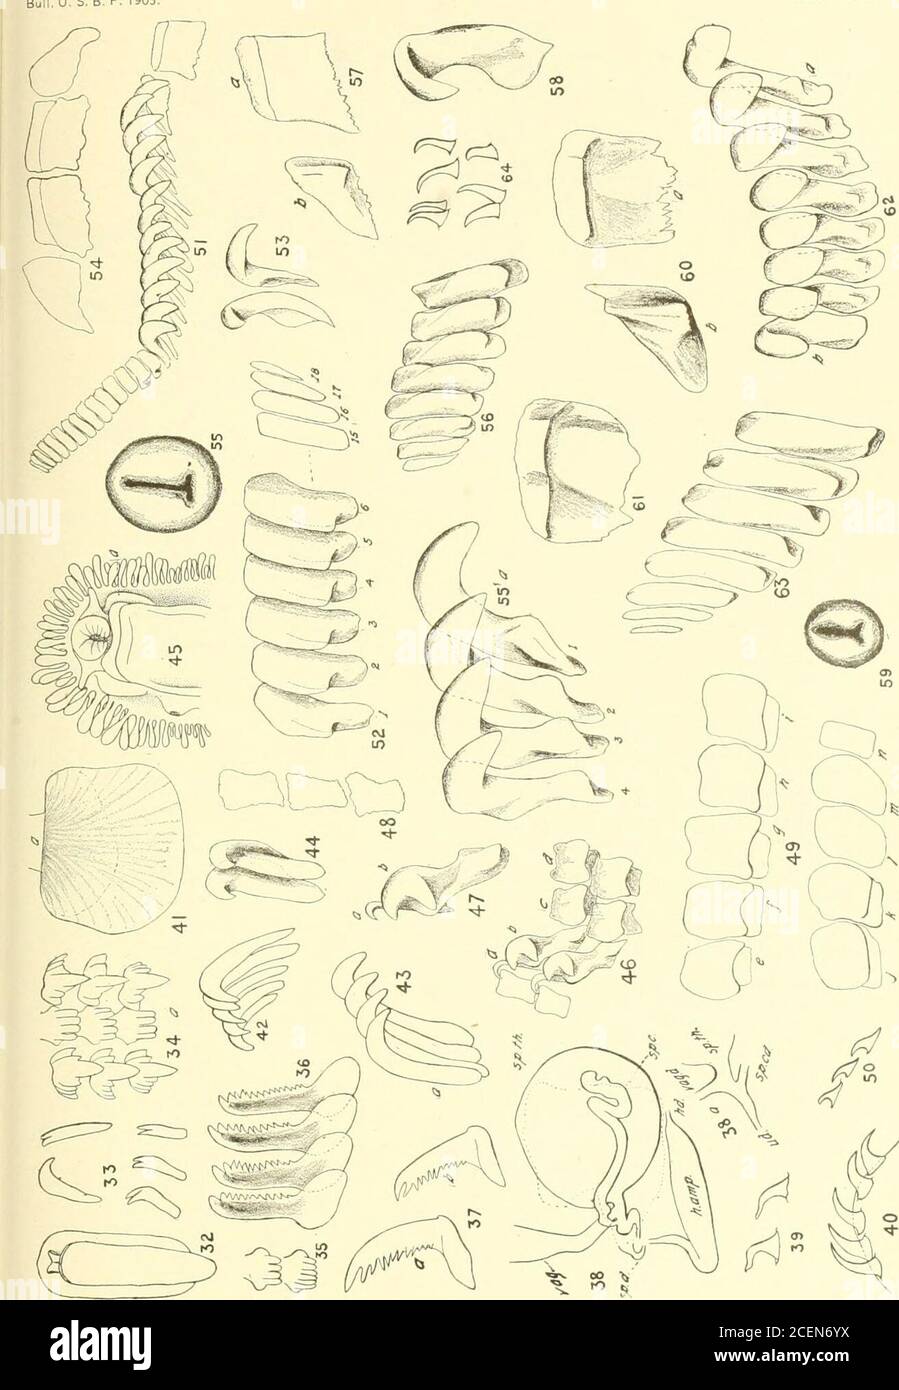 . Bulletin of the Bureau of Fisheries. he seventh to fourteenth uneini, inclusive, being omitted, x 83. (Cam.) Fig. 53.—Outermost (twelfth and thirteenth) pleurae in front and side view, x 52. (Cam.) Pig. 54.—Rhachidian plates of eighteenth row. x 52. (Cam.) Fig. 65.—Labial disc, x 9. (Cam.) Triopha maculata MacFarland. Fig. 5.5(1.-First to fourth pleur;e of tentli row of radula. x 83. (Cam.) Fig. 56.—Uneini of tenth row of radula. x 83. (Cam.) Fig. 57.—Rhachidian plates, a, of left median series; h, of lateral series, x 83. (Cam.) Fig. ,5S.—Fourth pleural tooth, inner face, x 83. (Cam.) Fi, o Stock Photo